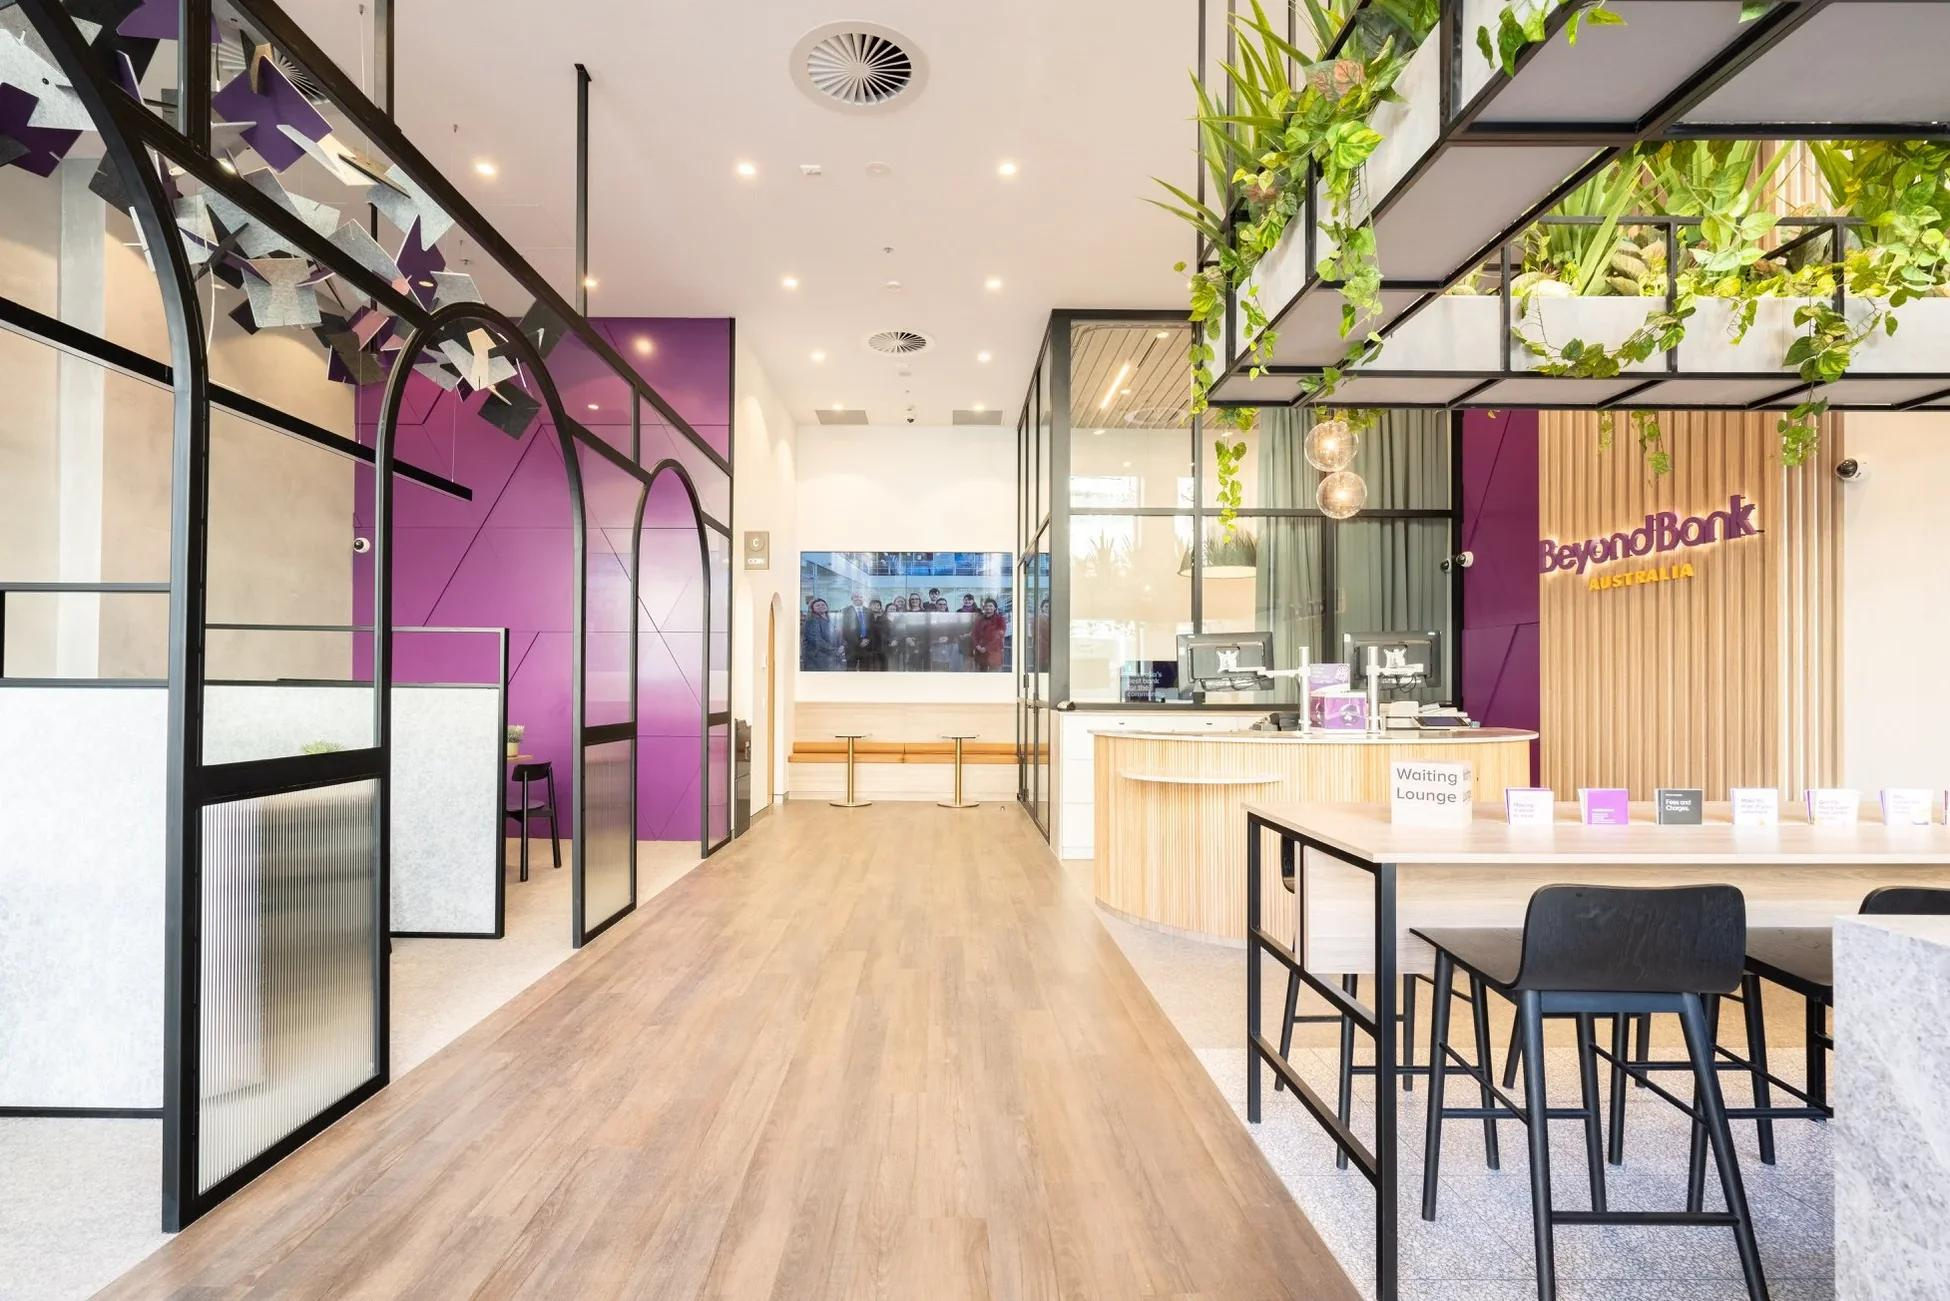 Beyond Bank, Evergreen Artificial Greenery Fitout across Branches and Offices Australia-wide